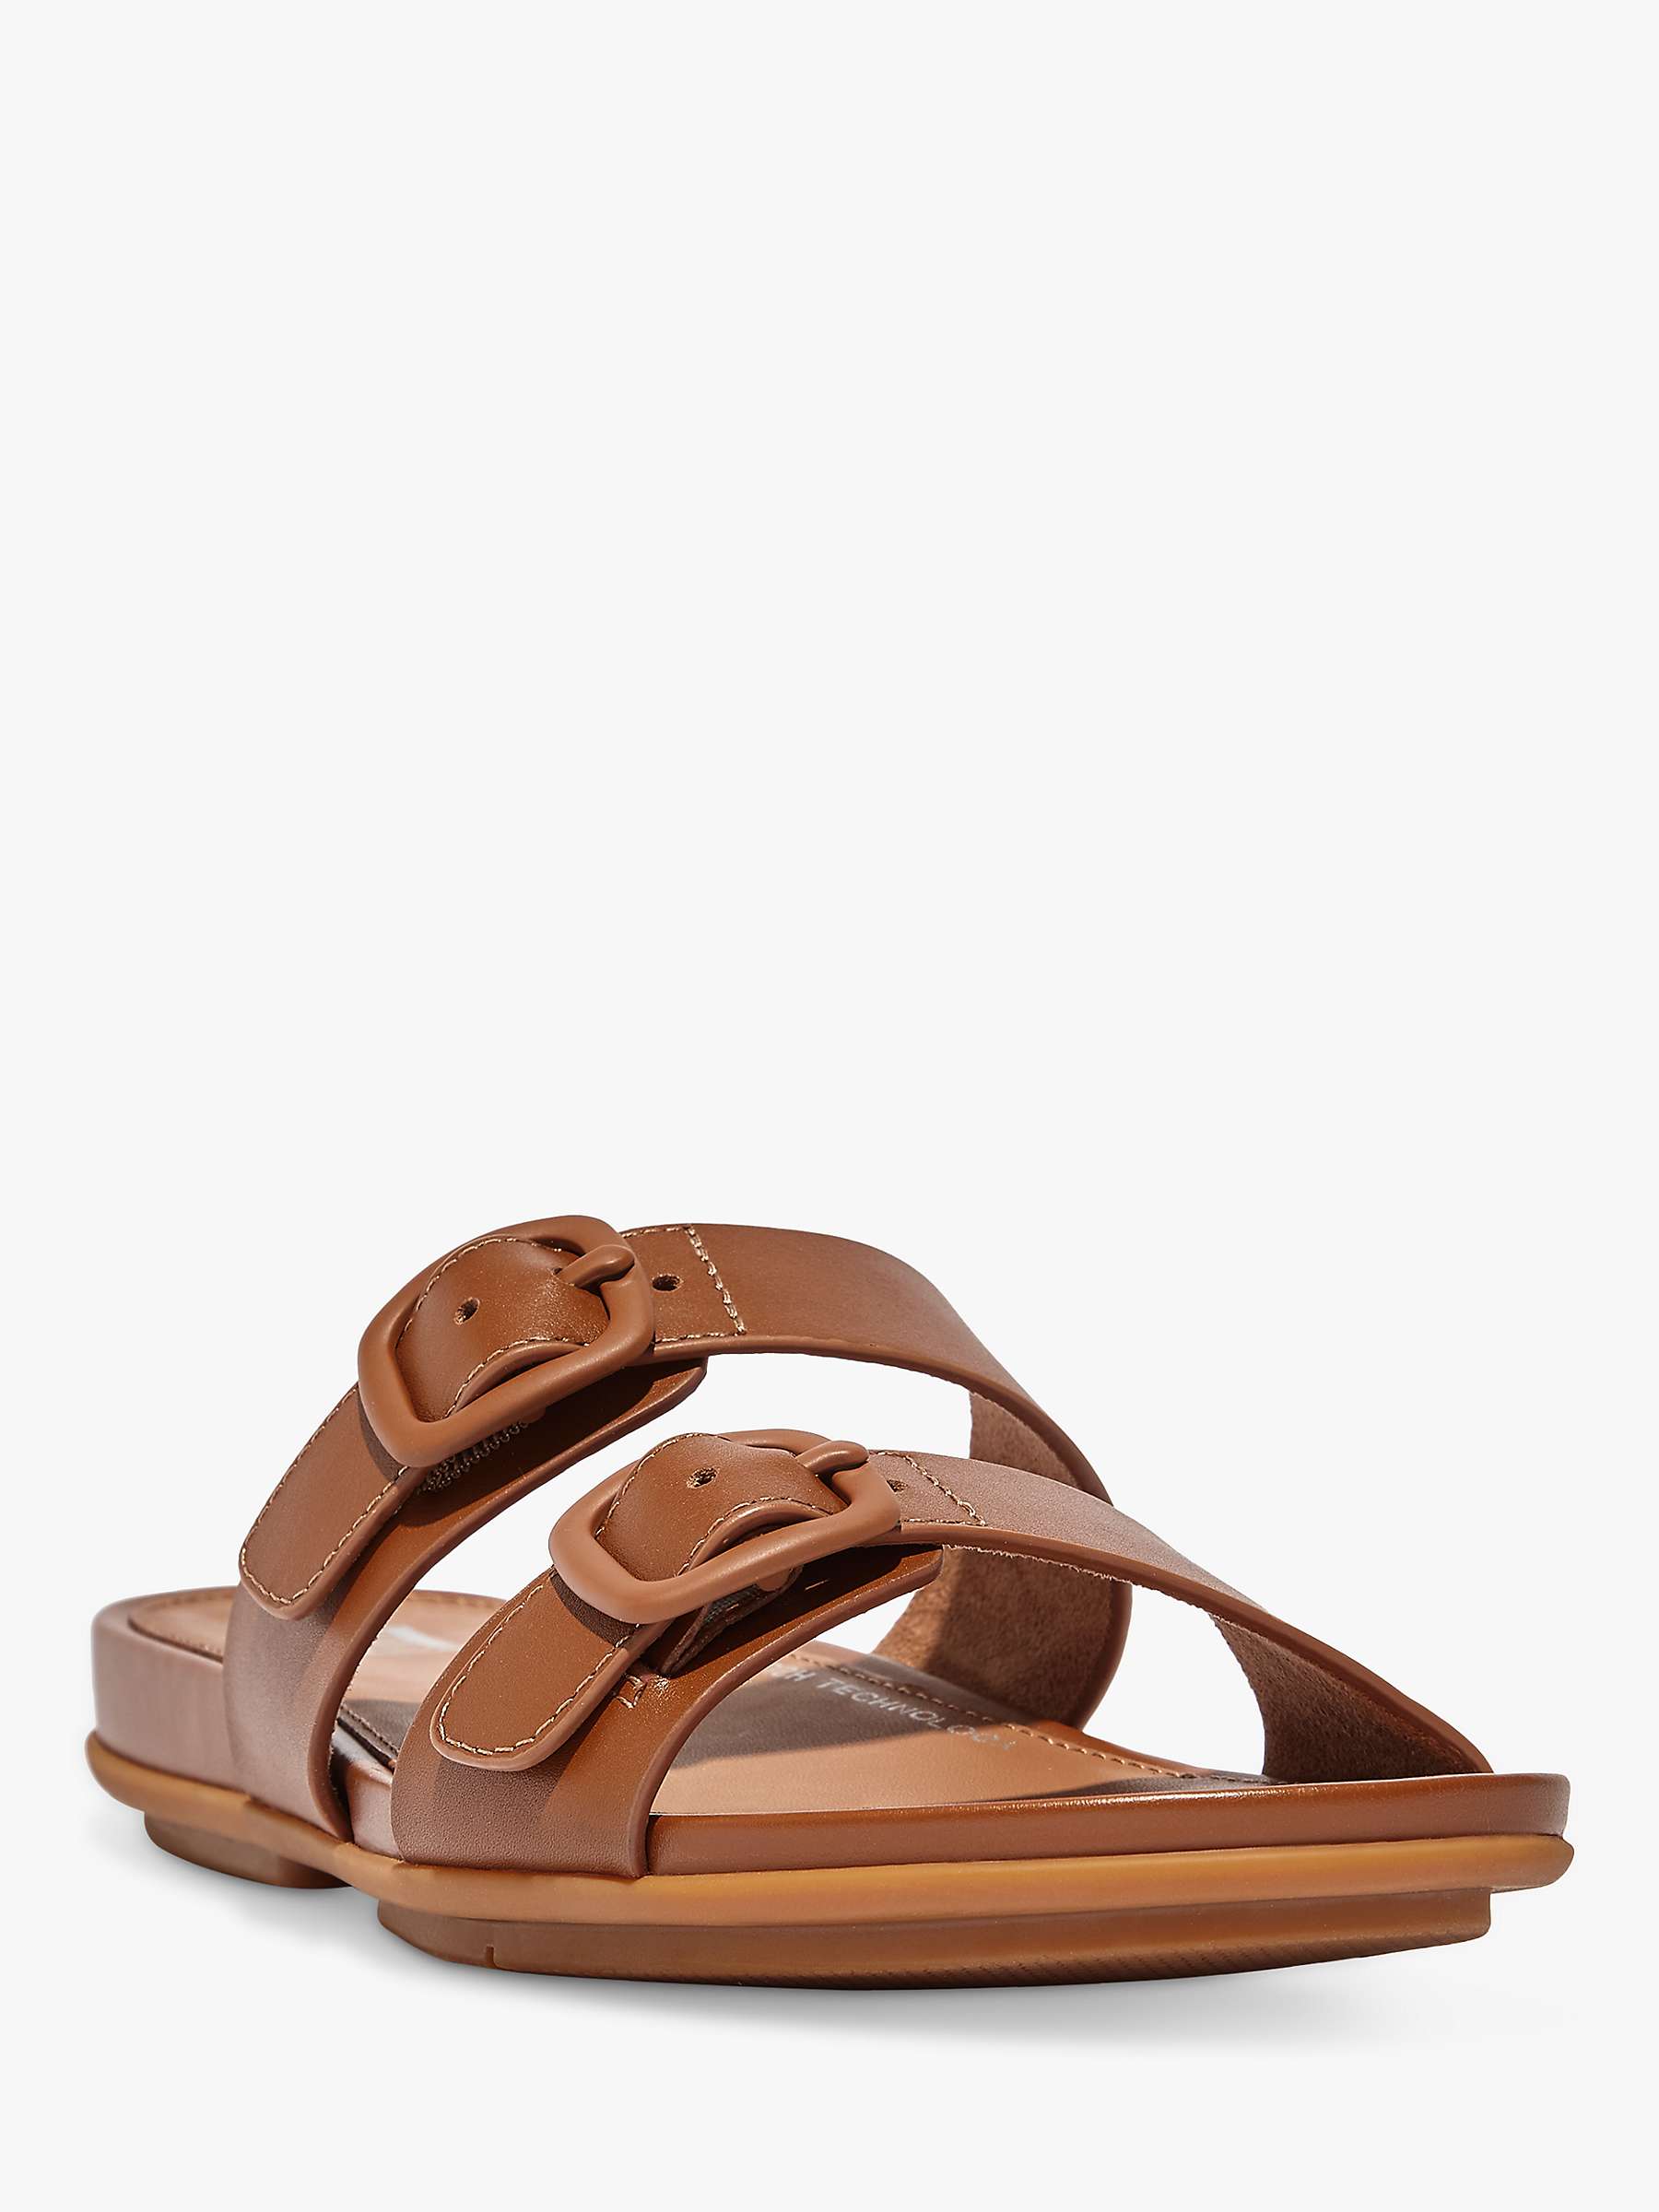 Buy FitFlop Gracie Leather Two Strap Slider Sandals Online at johnlewis.com